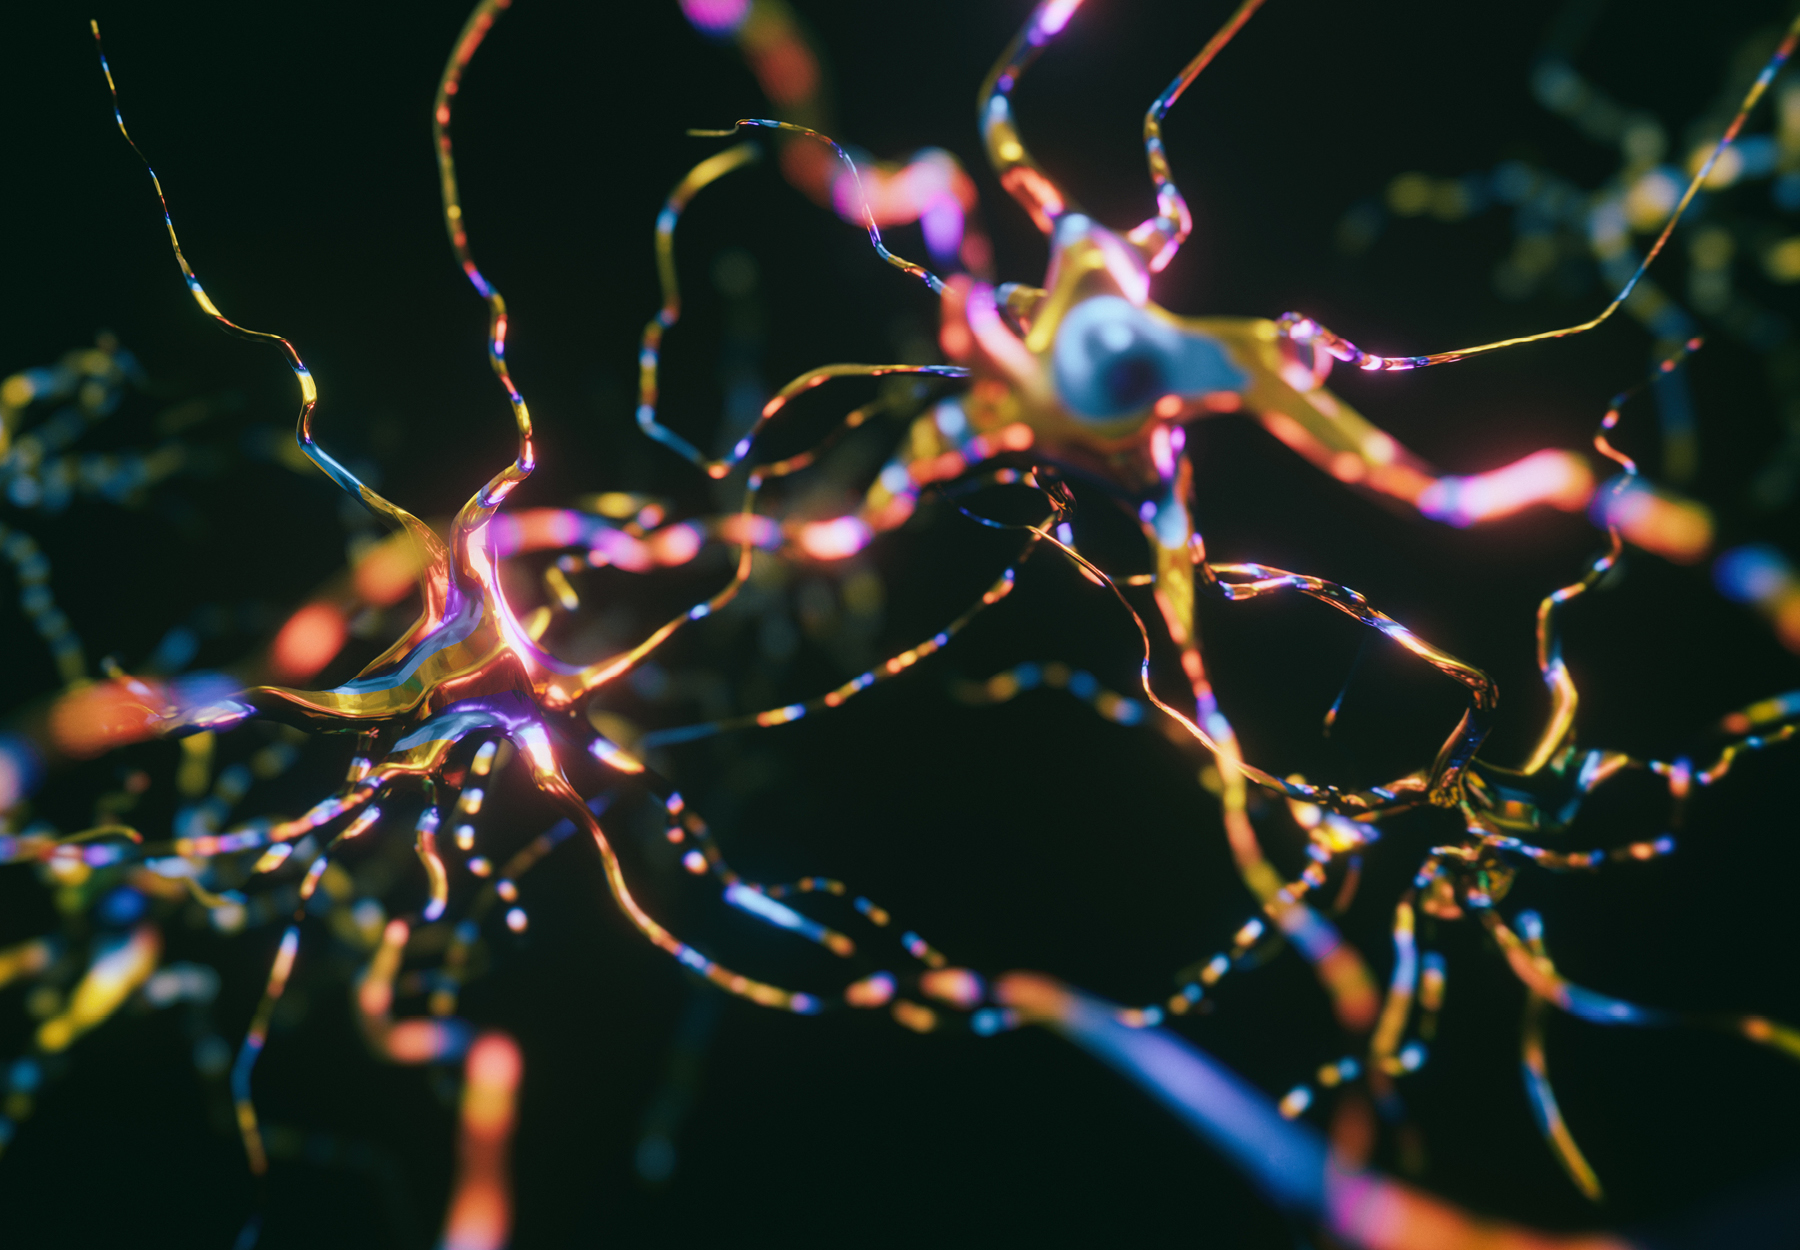 Neuron cell system iStock image